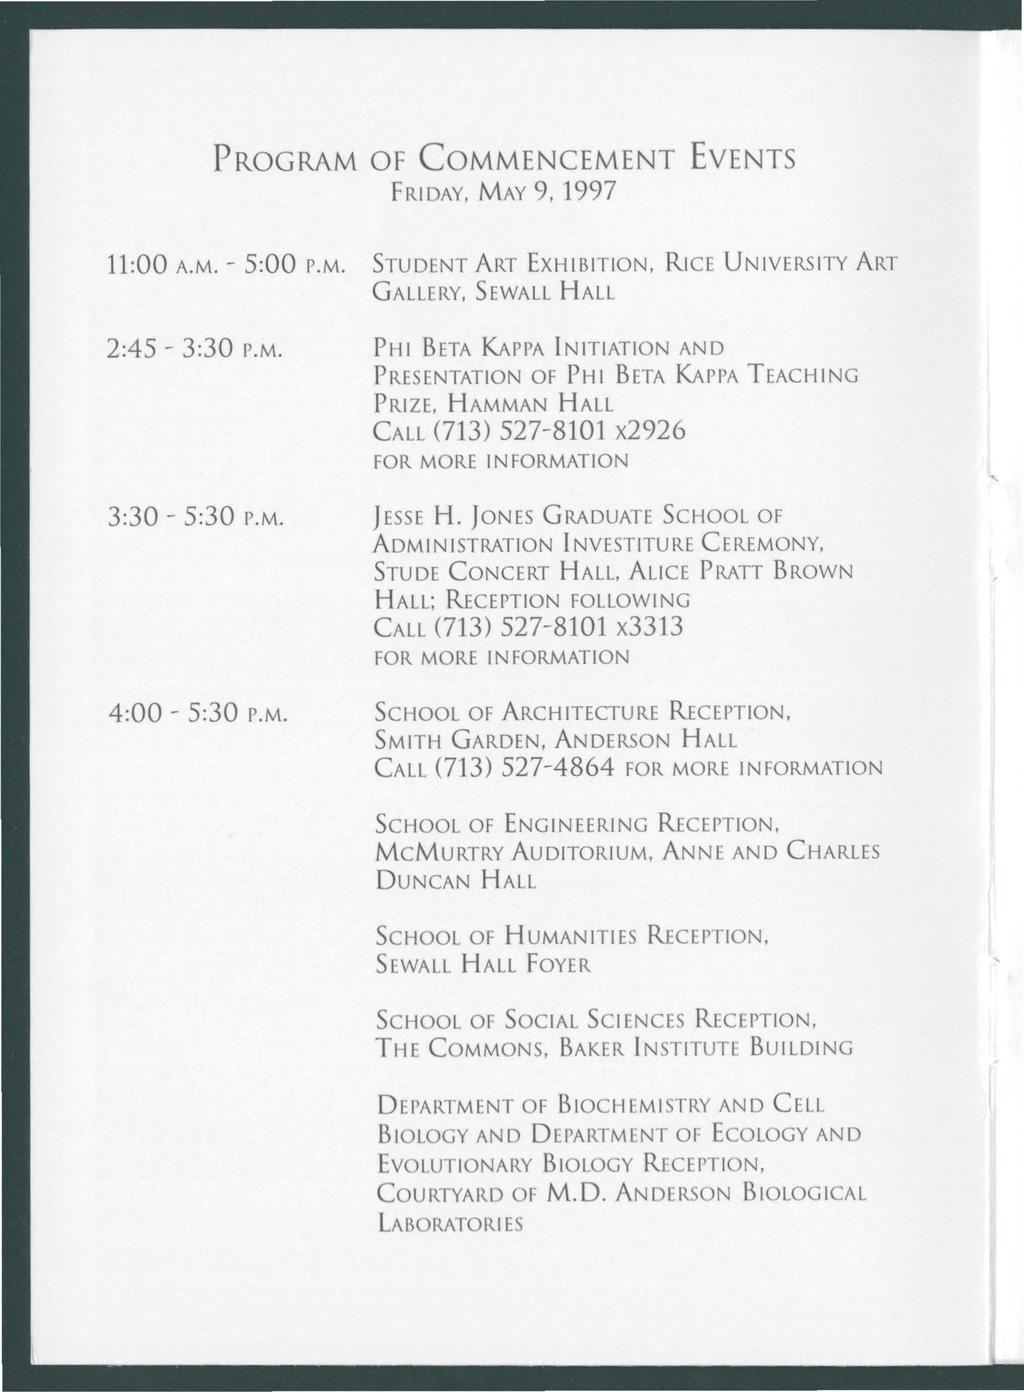 PROGRAM OF COMMENCEMENT EVENTS FRIDAY, MAY 9, 1997 11:00 A.M.- 5:00 P.M. STUDENT ART EXHIBITION, RICE UNIVERSITY ART GALLERY, SEWALL HALL 2:45-3:30 P.M. PHI BETA MPPA INITIATION AND PRESENTATION OF PHI BETA MPPA TEACHING PRIZE, HAMMAN HALL CALL (713) 527-8101 x2926 FOR MORE INFORMATION 3:30-5:30 P.